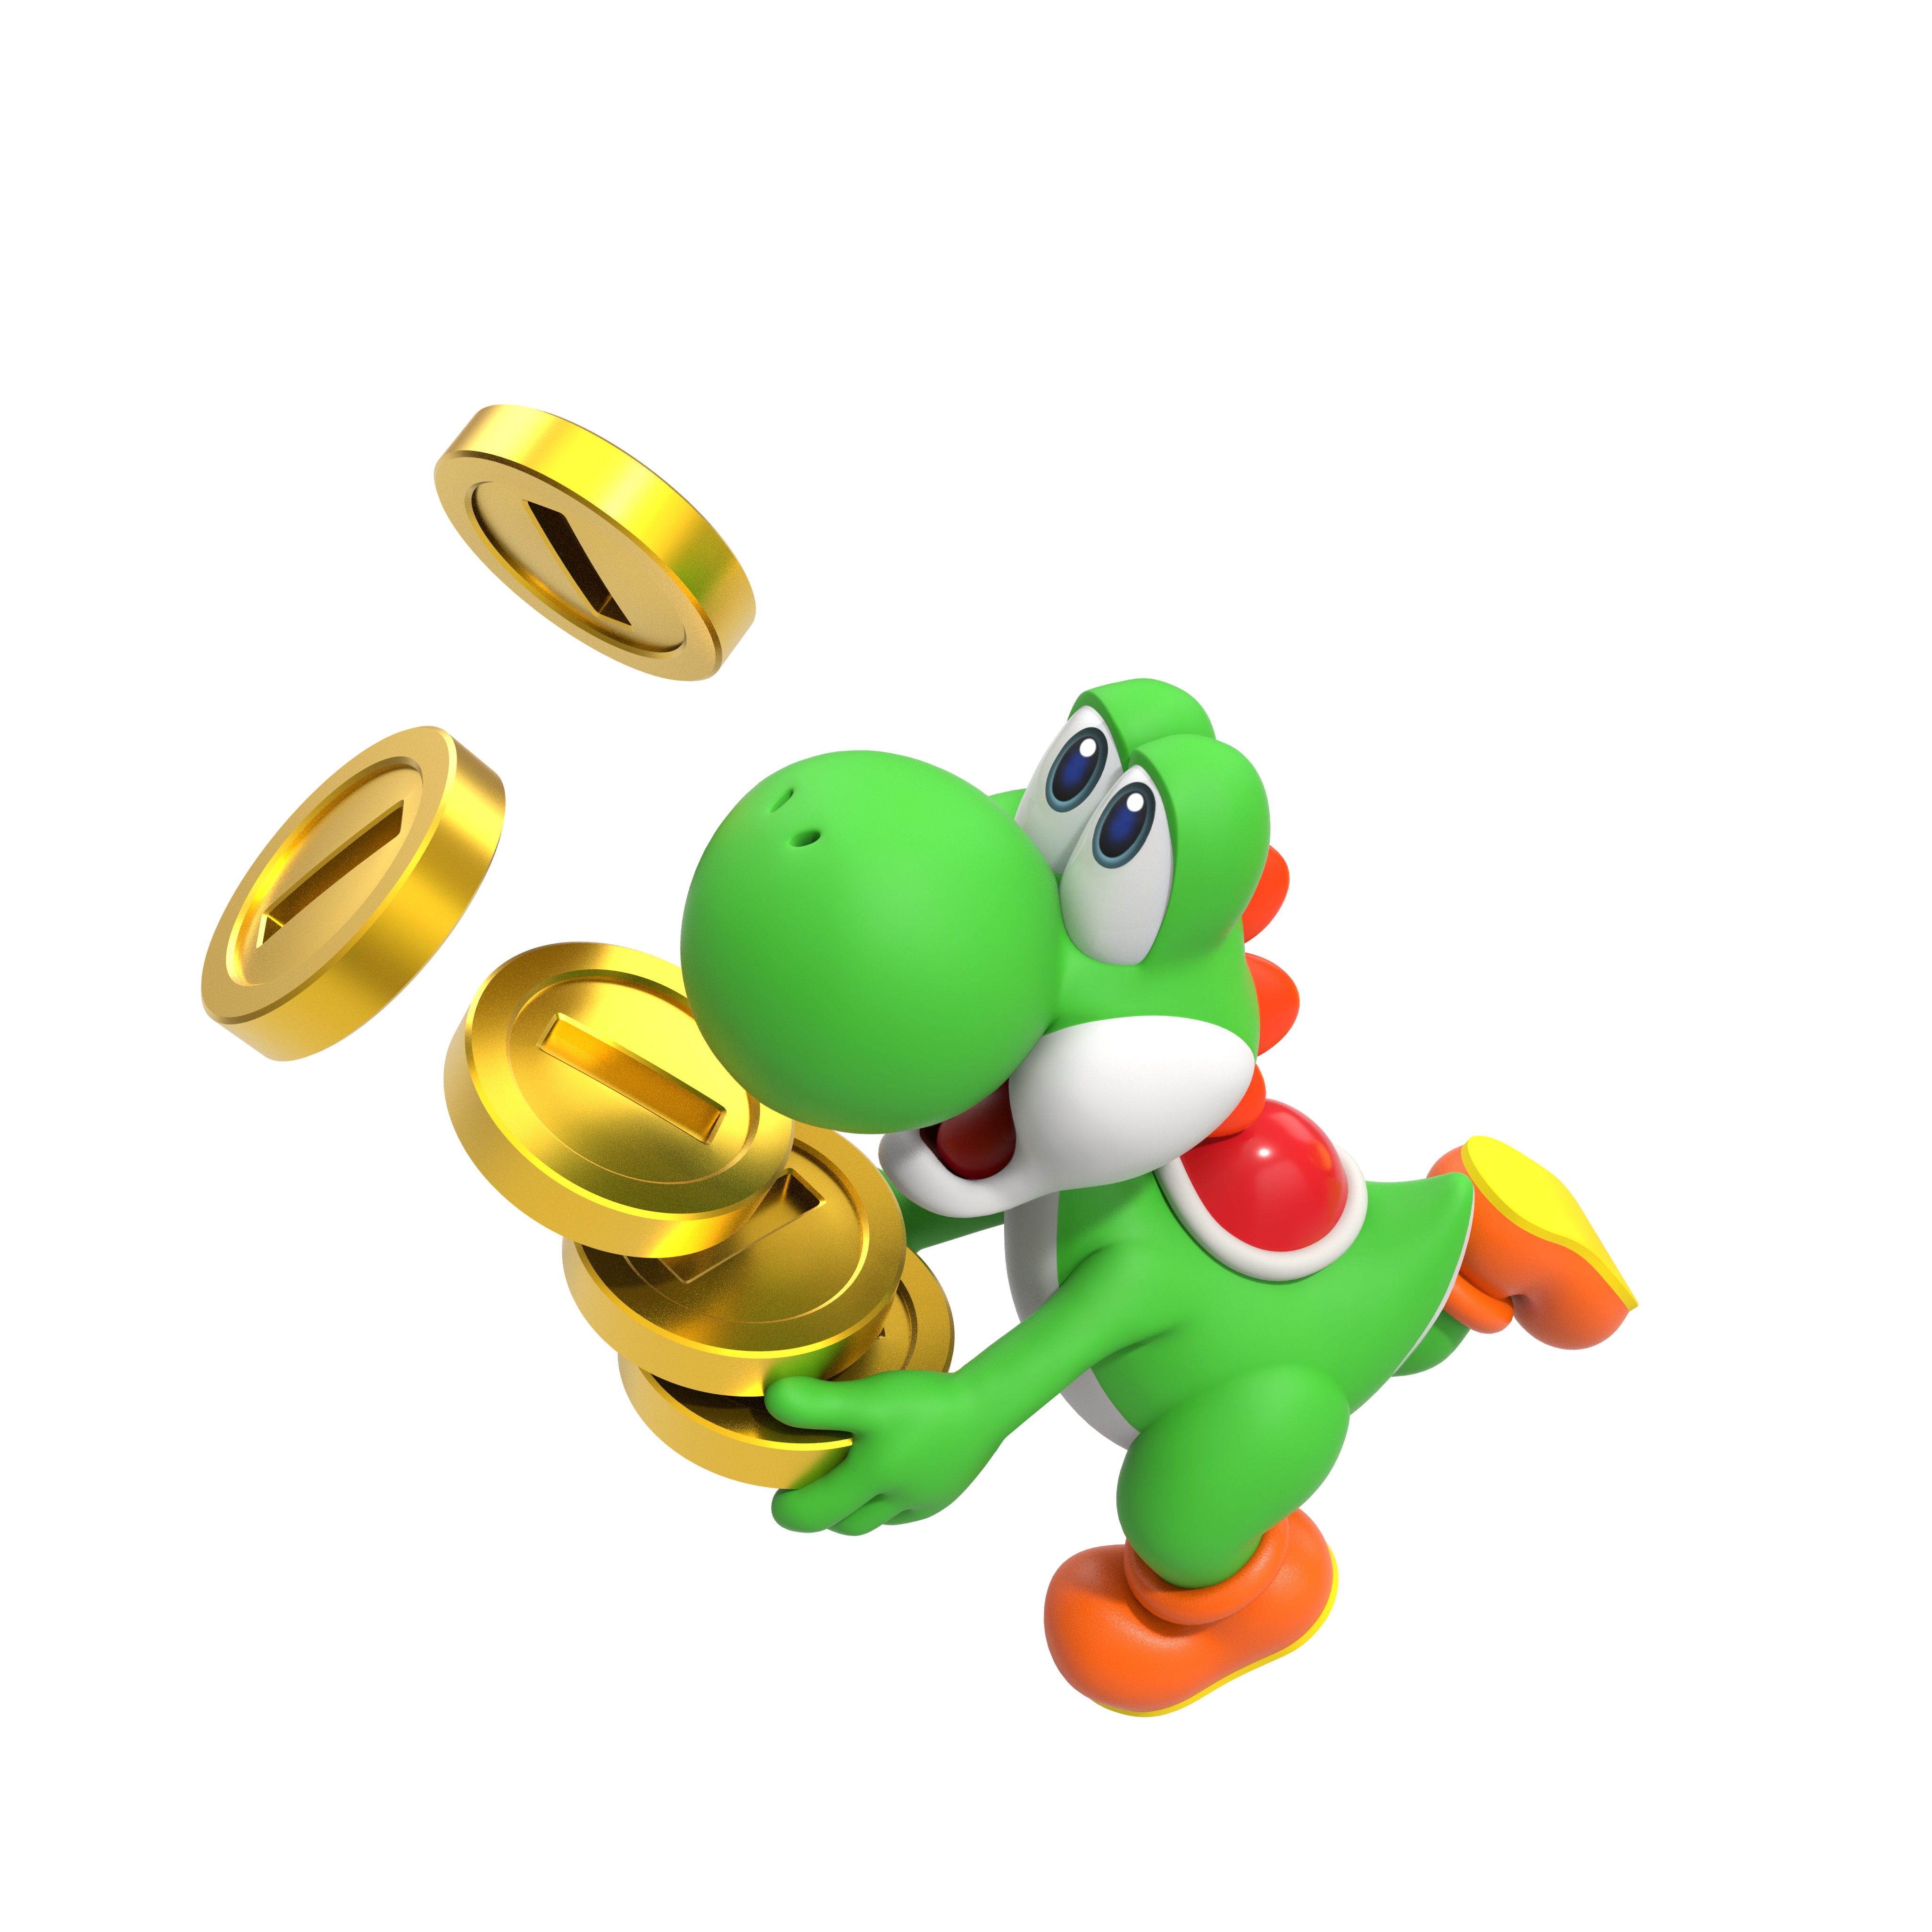 download mario party superstars yoshi for free